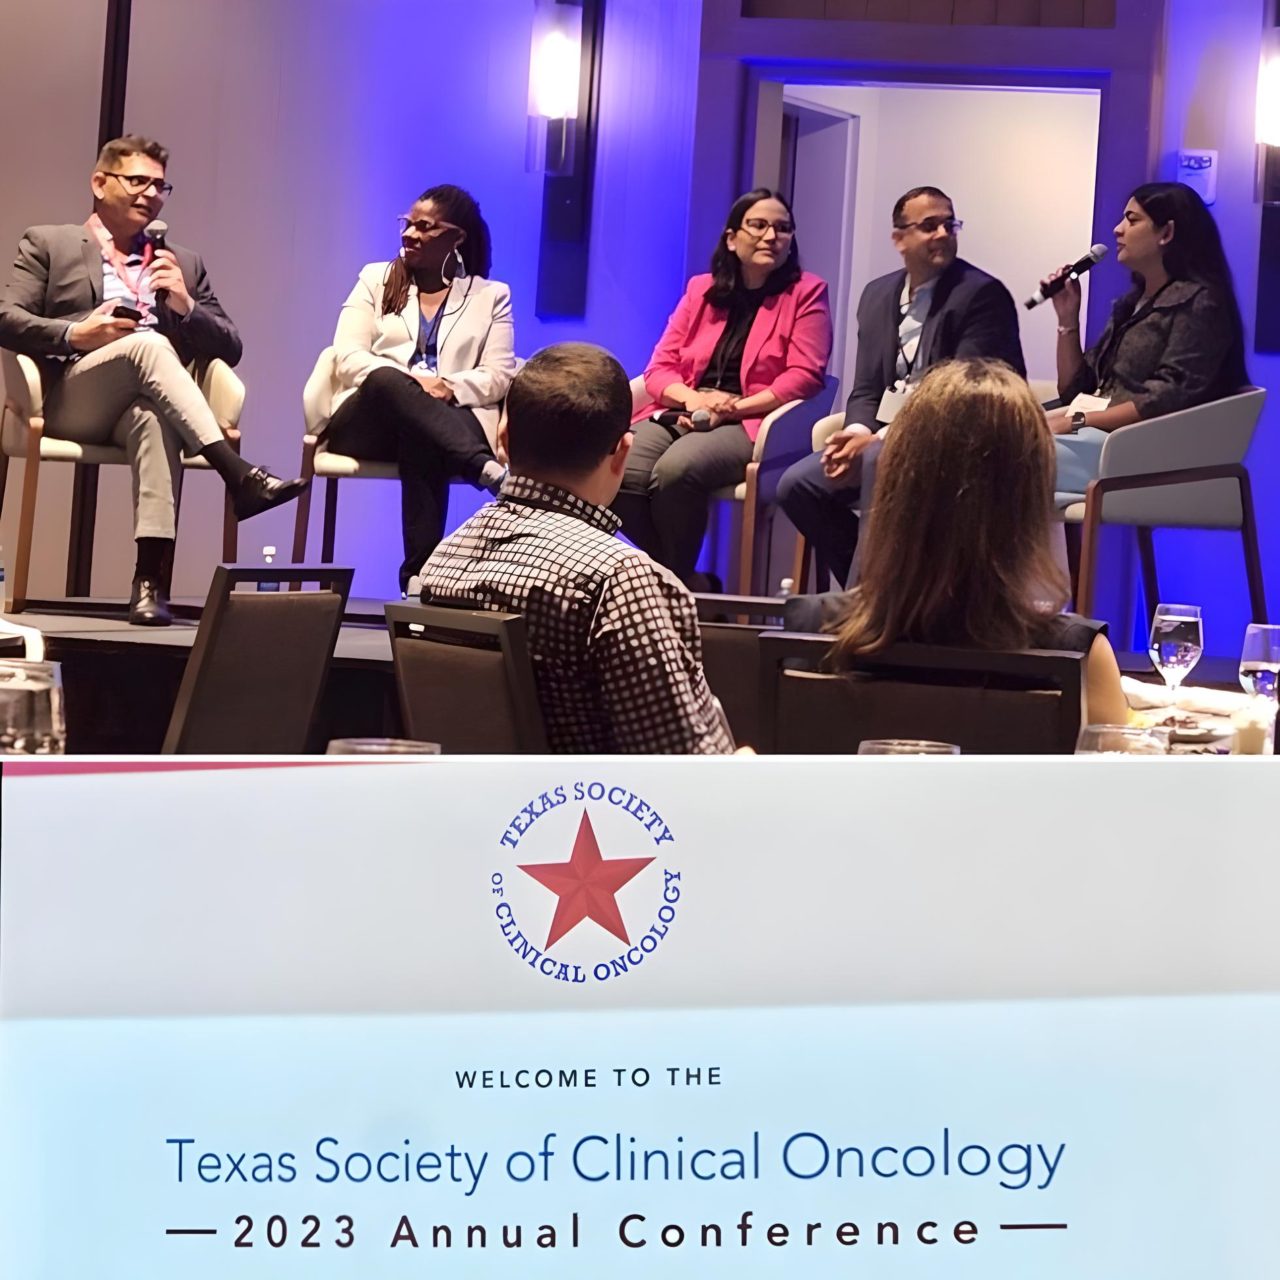 Ishwaria Subbiah: Such a pleasure to help kickoff the Texas Society of Clinical Oncology’s 2023 Annual Meeting.